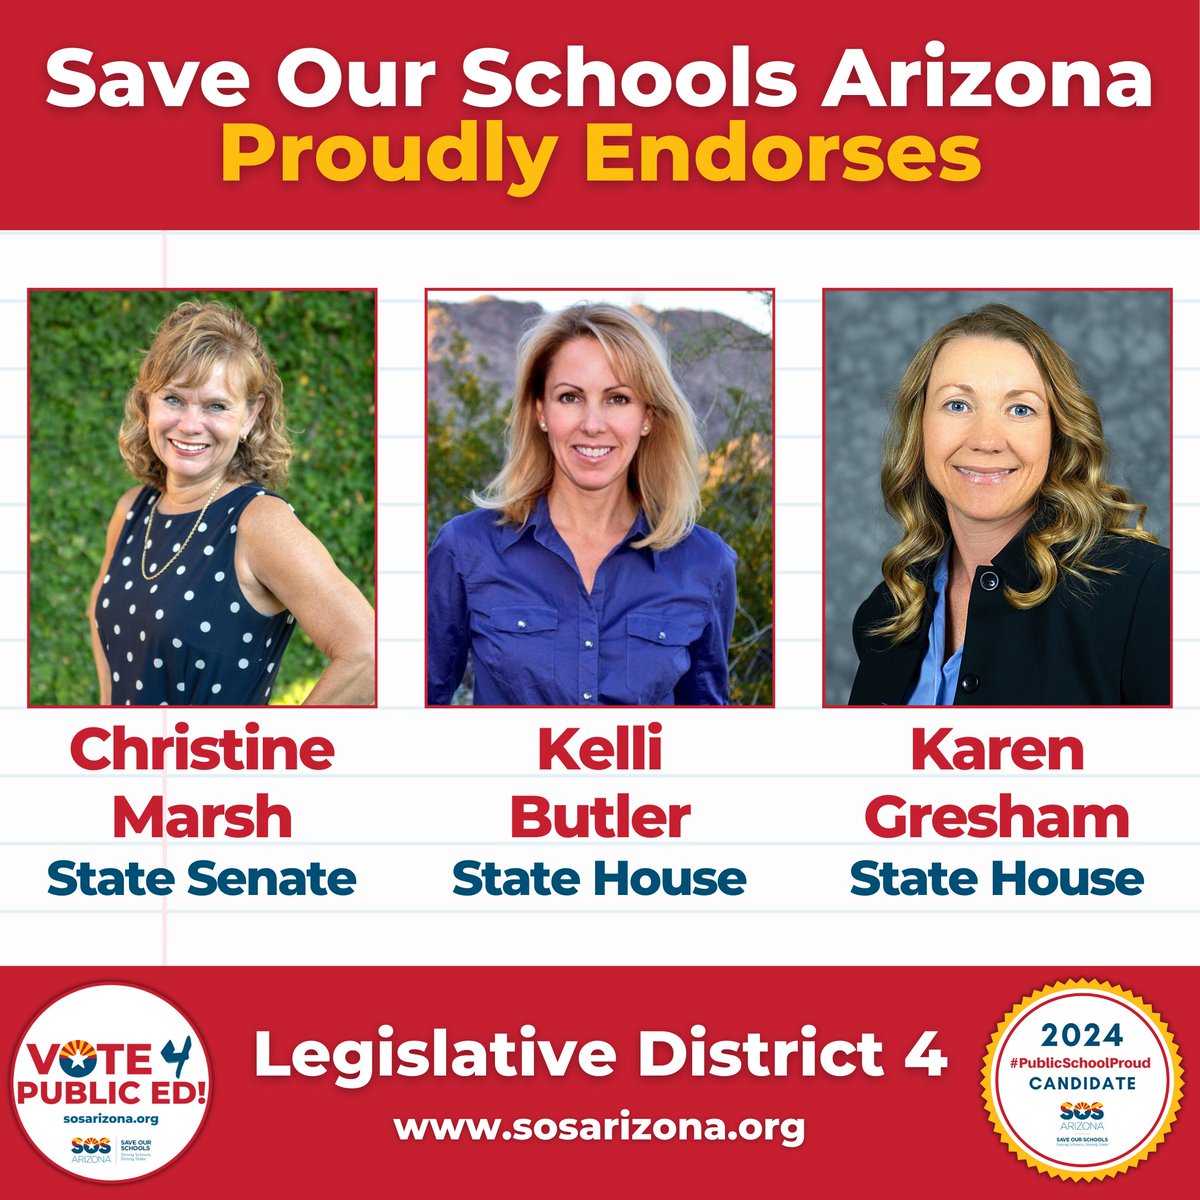 🗳️ 🎉 SOSAZ proudly endorses @ChristinePMarsh for State Senate and @KarenGreshamAZ & @KelliButlerAZ for State House in Legislative District 4. These #PublicSchoolProud candidates will be true champions for public education and will fight for AZ kids!